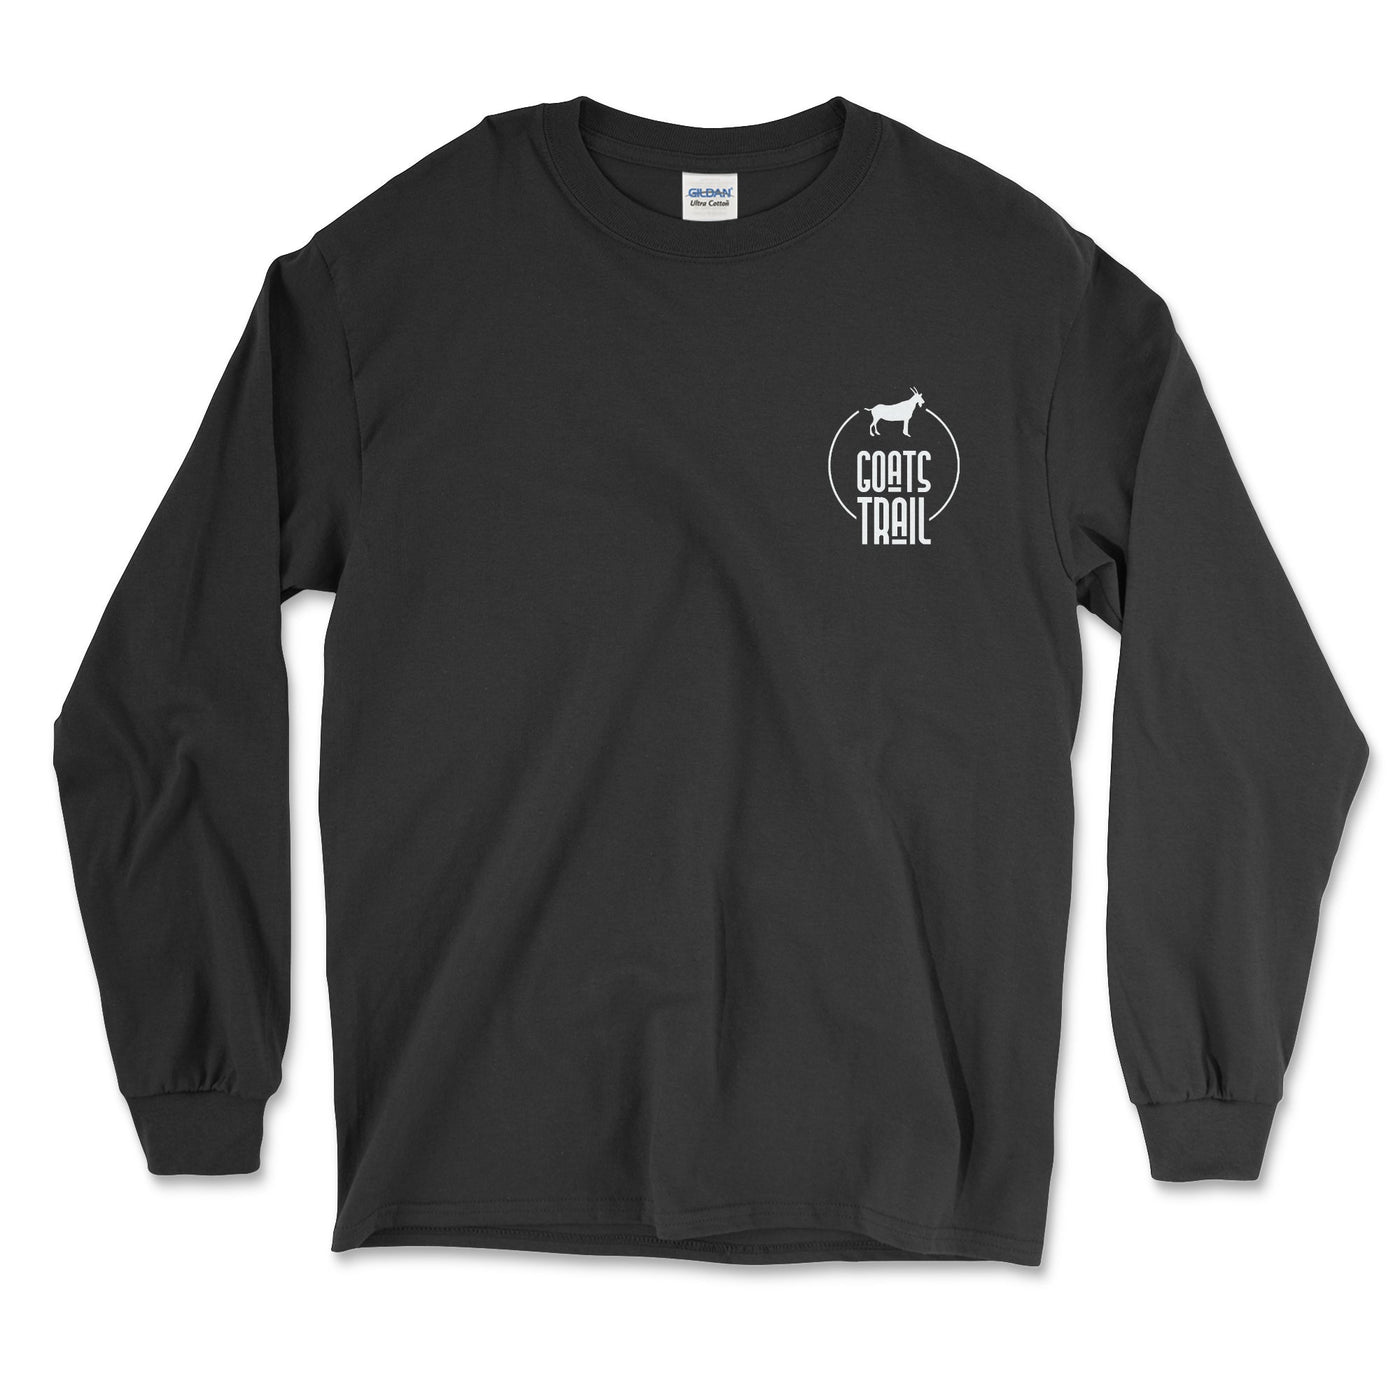 Overland Rugged Trails Long-Sleeve Tee Shirt - Goats Trail Off-Road Apparel Company